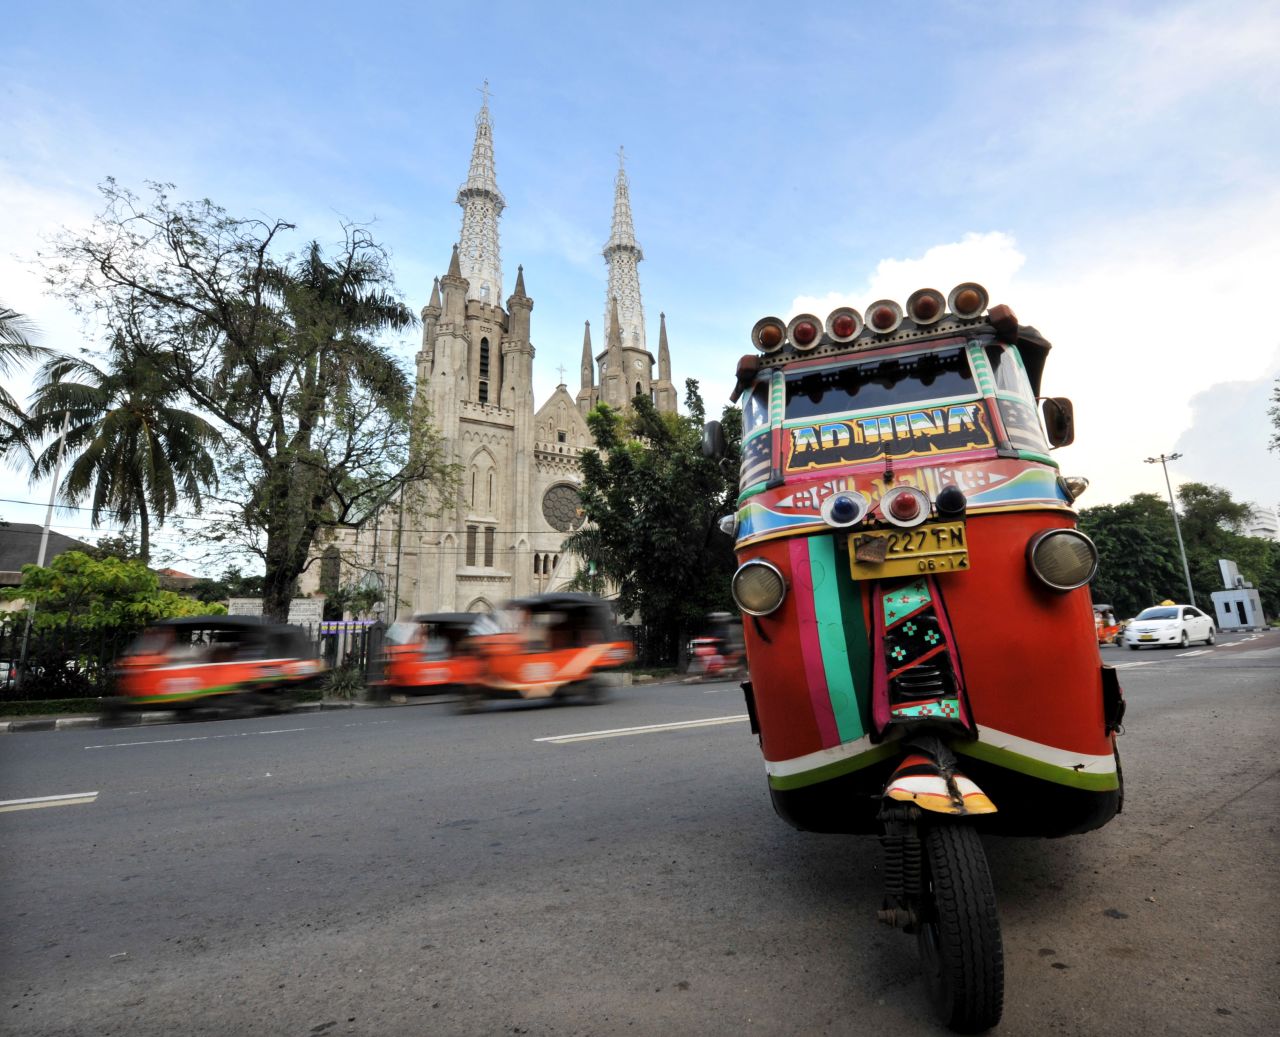 A bajaj is parked in front of the St. Mary of the Assumption Cathedral in Jakarta.